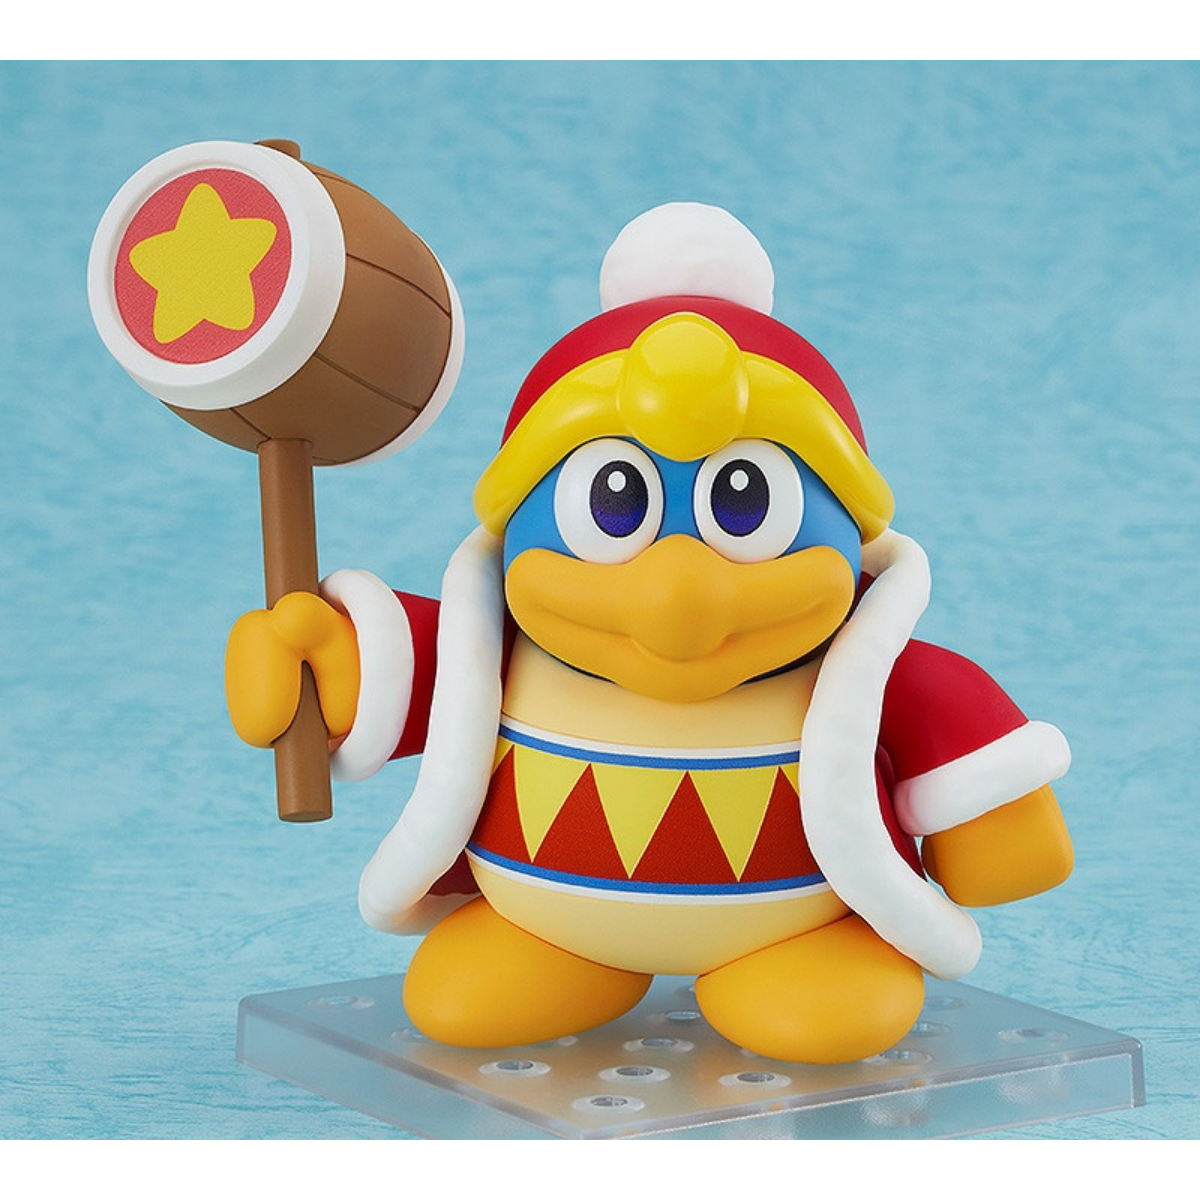 Kirby Nendoroid [1950] &quot;King Dedede&quot;-Good Smile Company-Ace Cards &amp; Collectibles